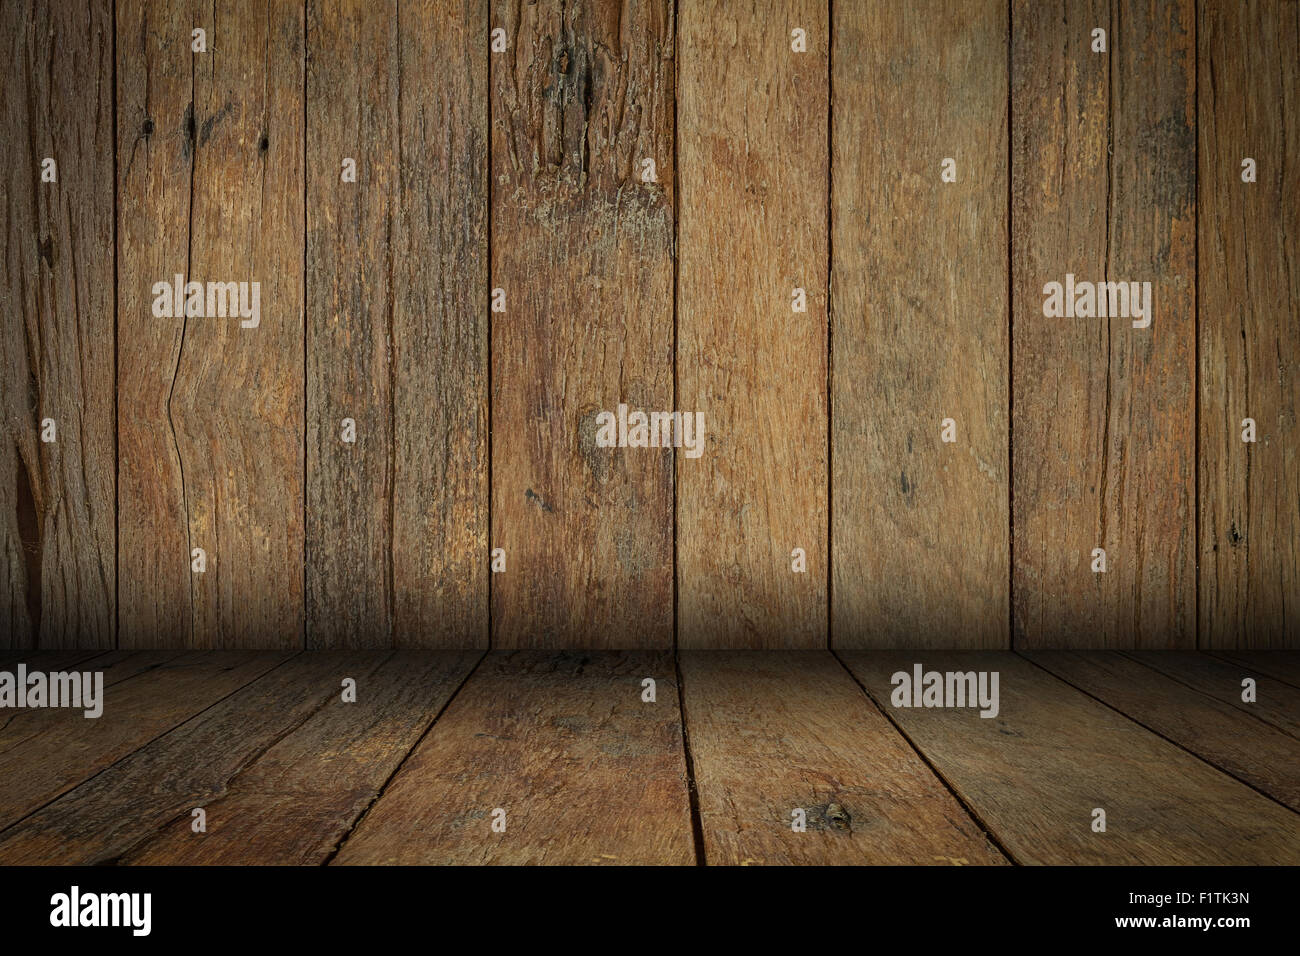 Background of brown old natural wood planks Stock Photo